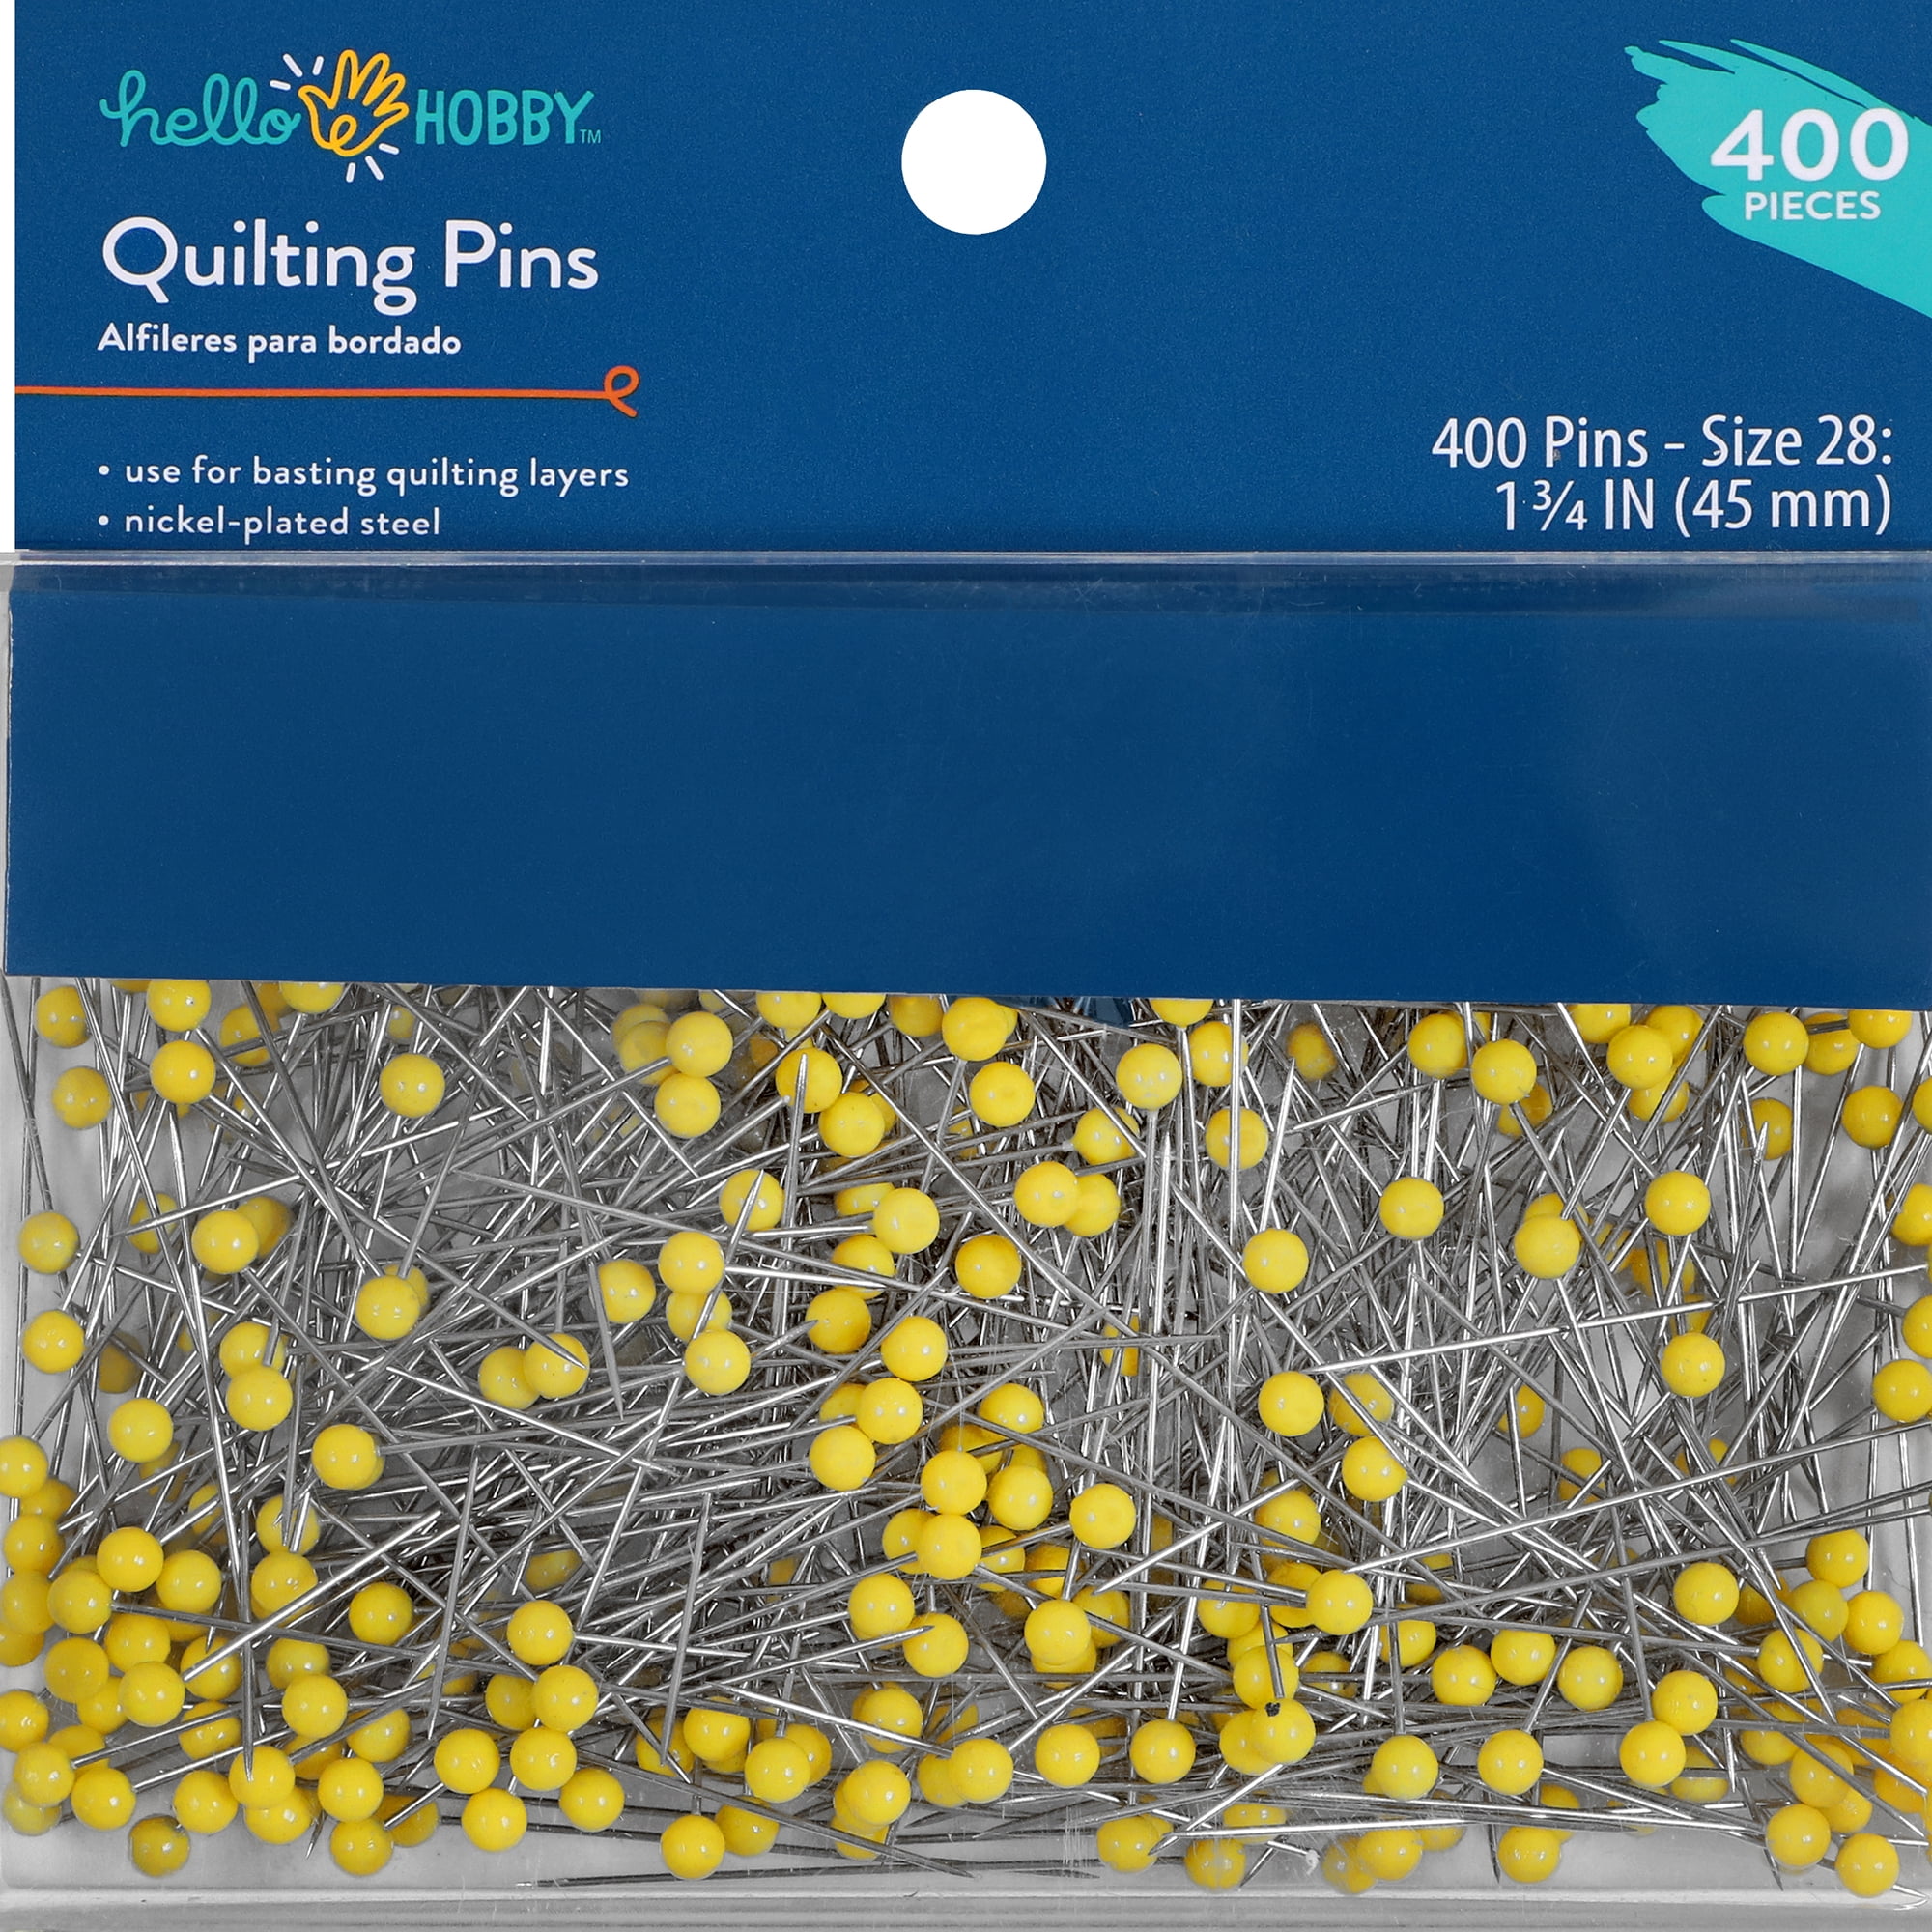 Shop Quilting Clips, Pins & Needles Online